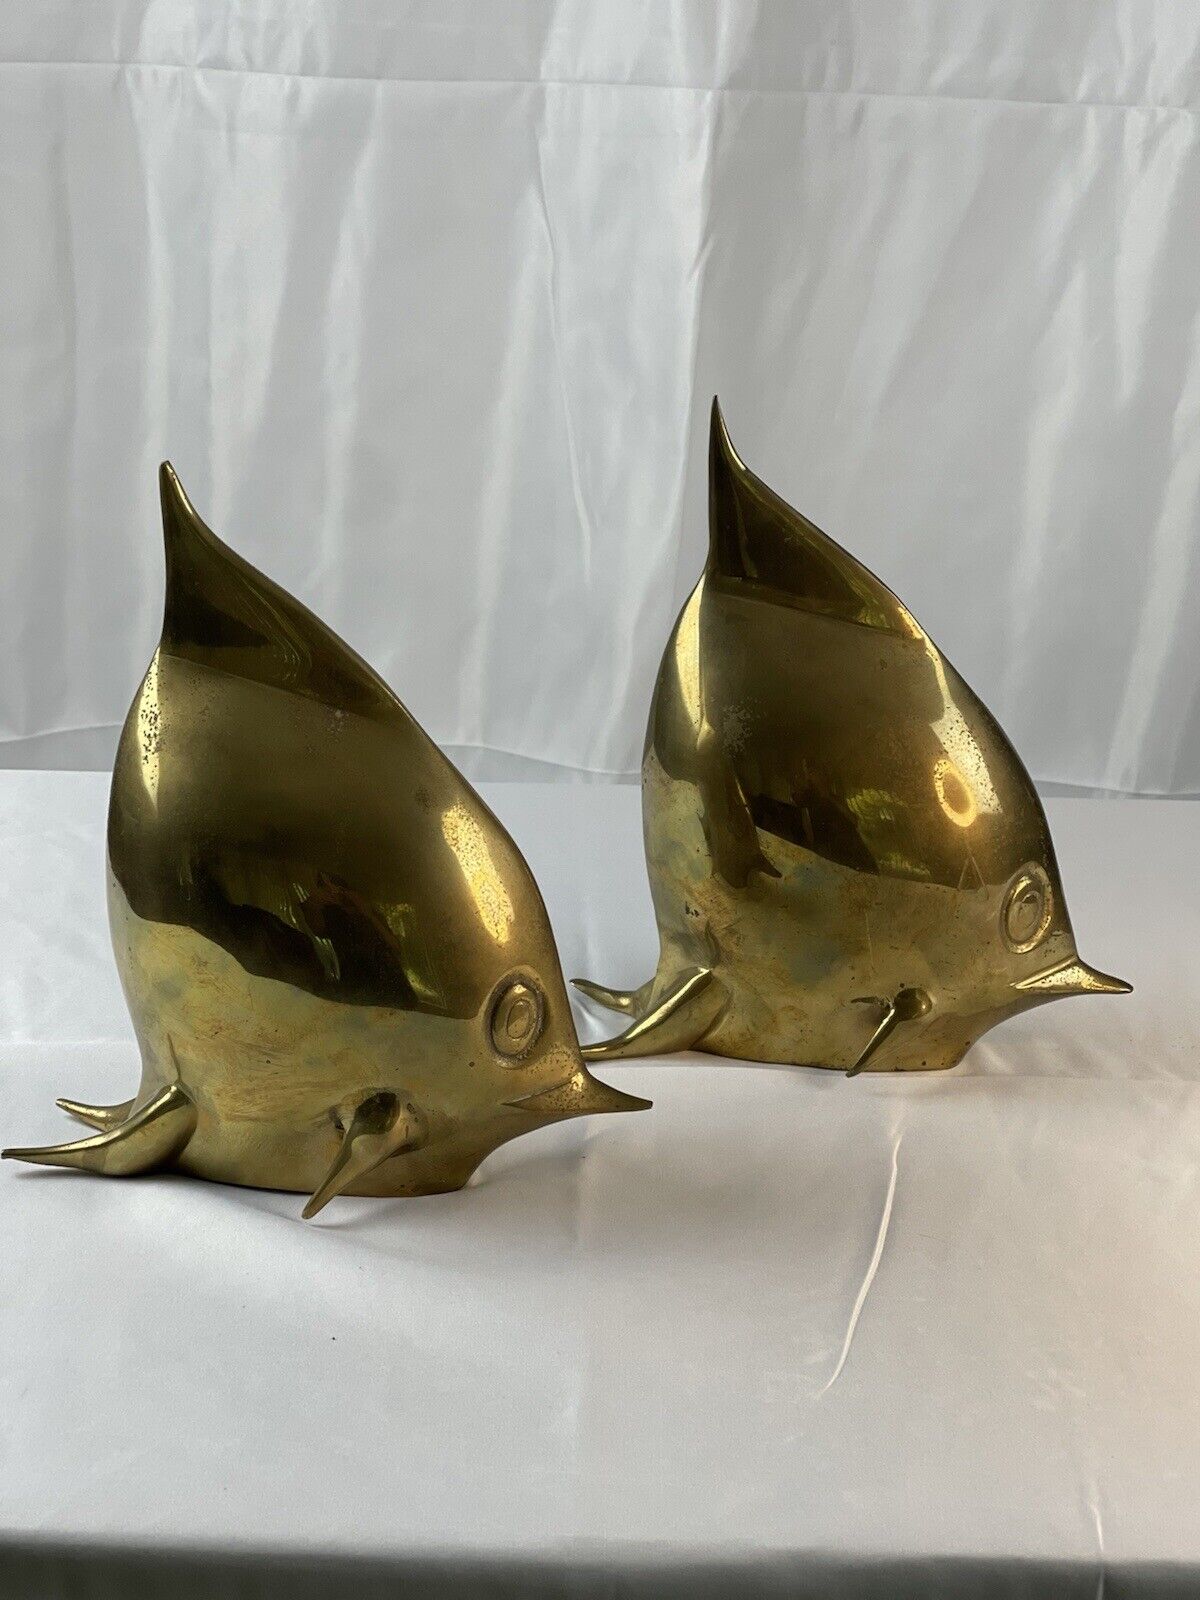 FABULOUS RARE Dolbi Cashier Pair of Solid Brass Tropical Fish Statues